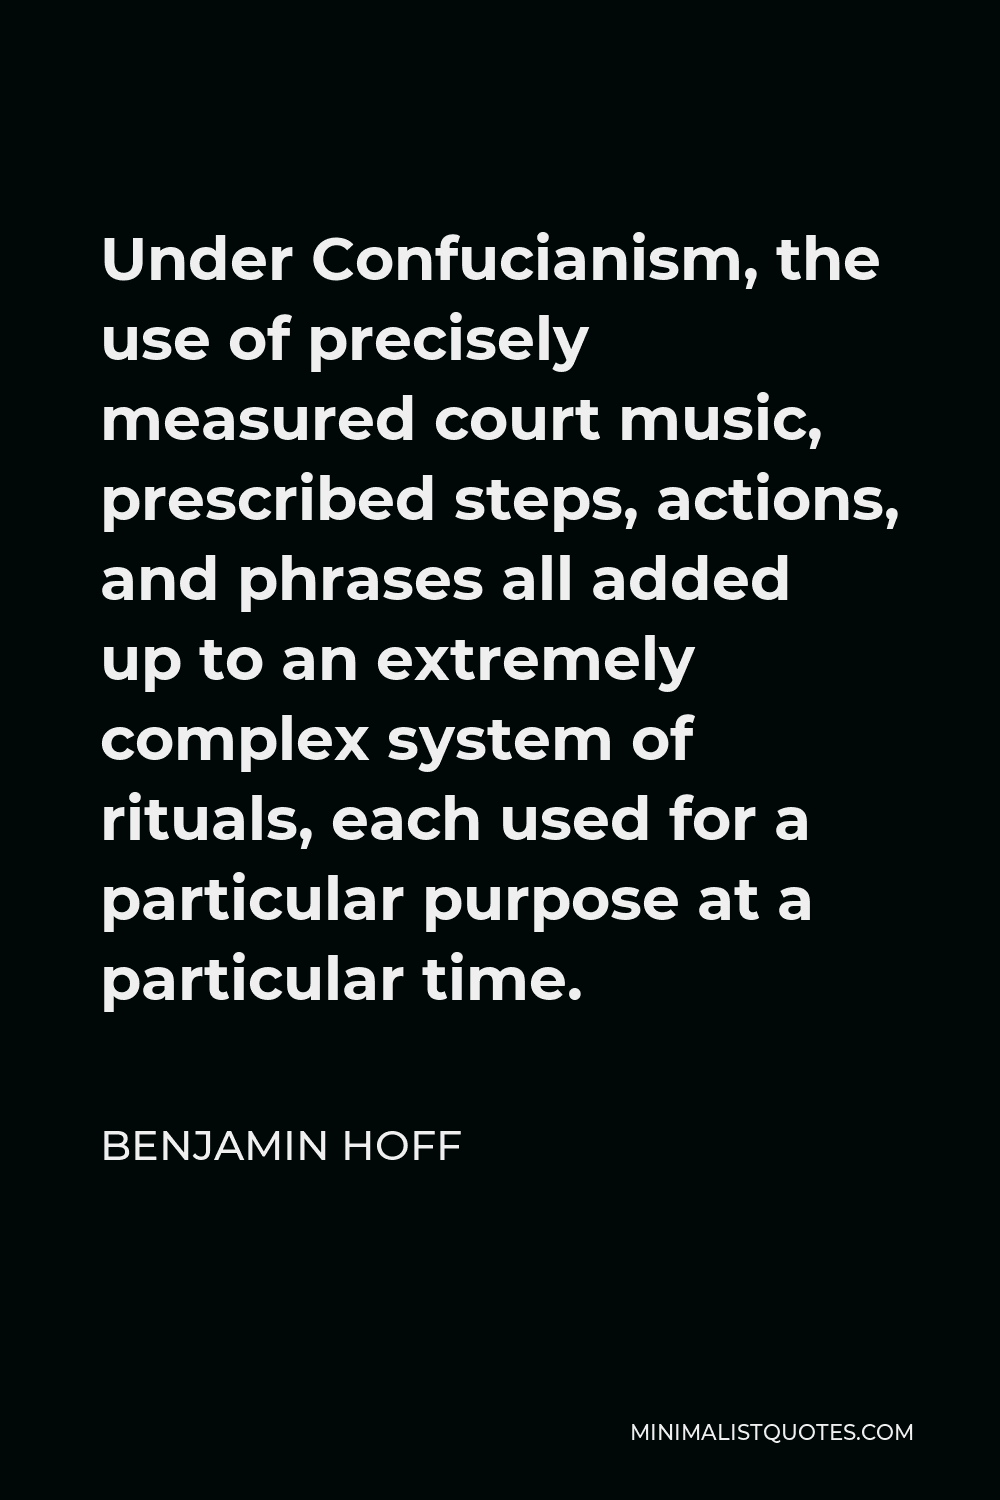 Benjamin Hoff Quote - Under Confucianism, the use of precisely measured court music, prescribed steps, actions, and phrases all added up to an extremely complex system of rituals, each used for a particular purpose at a particular time.